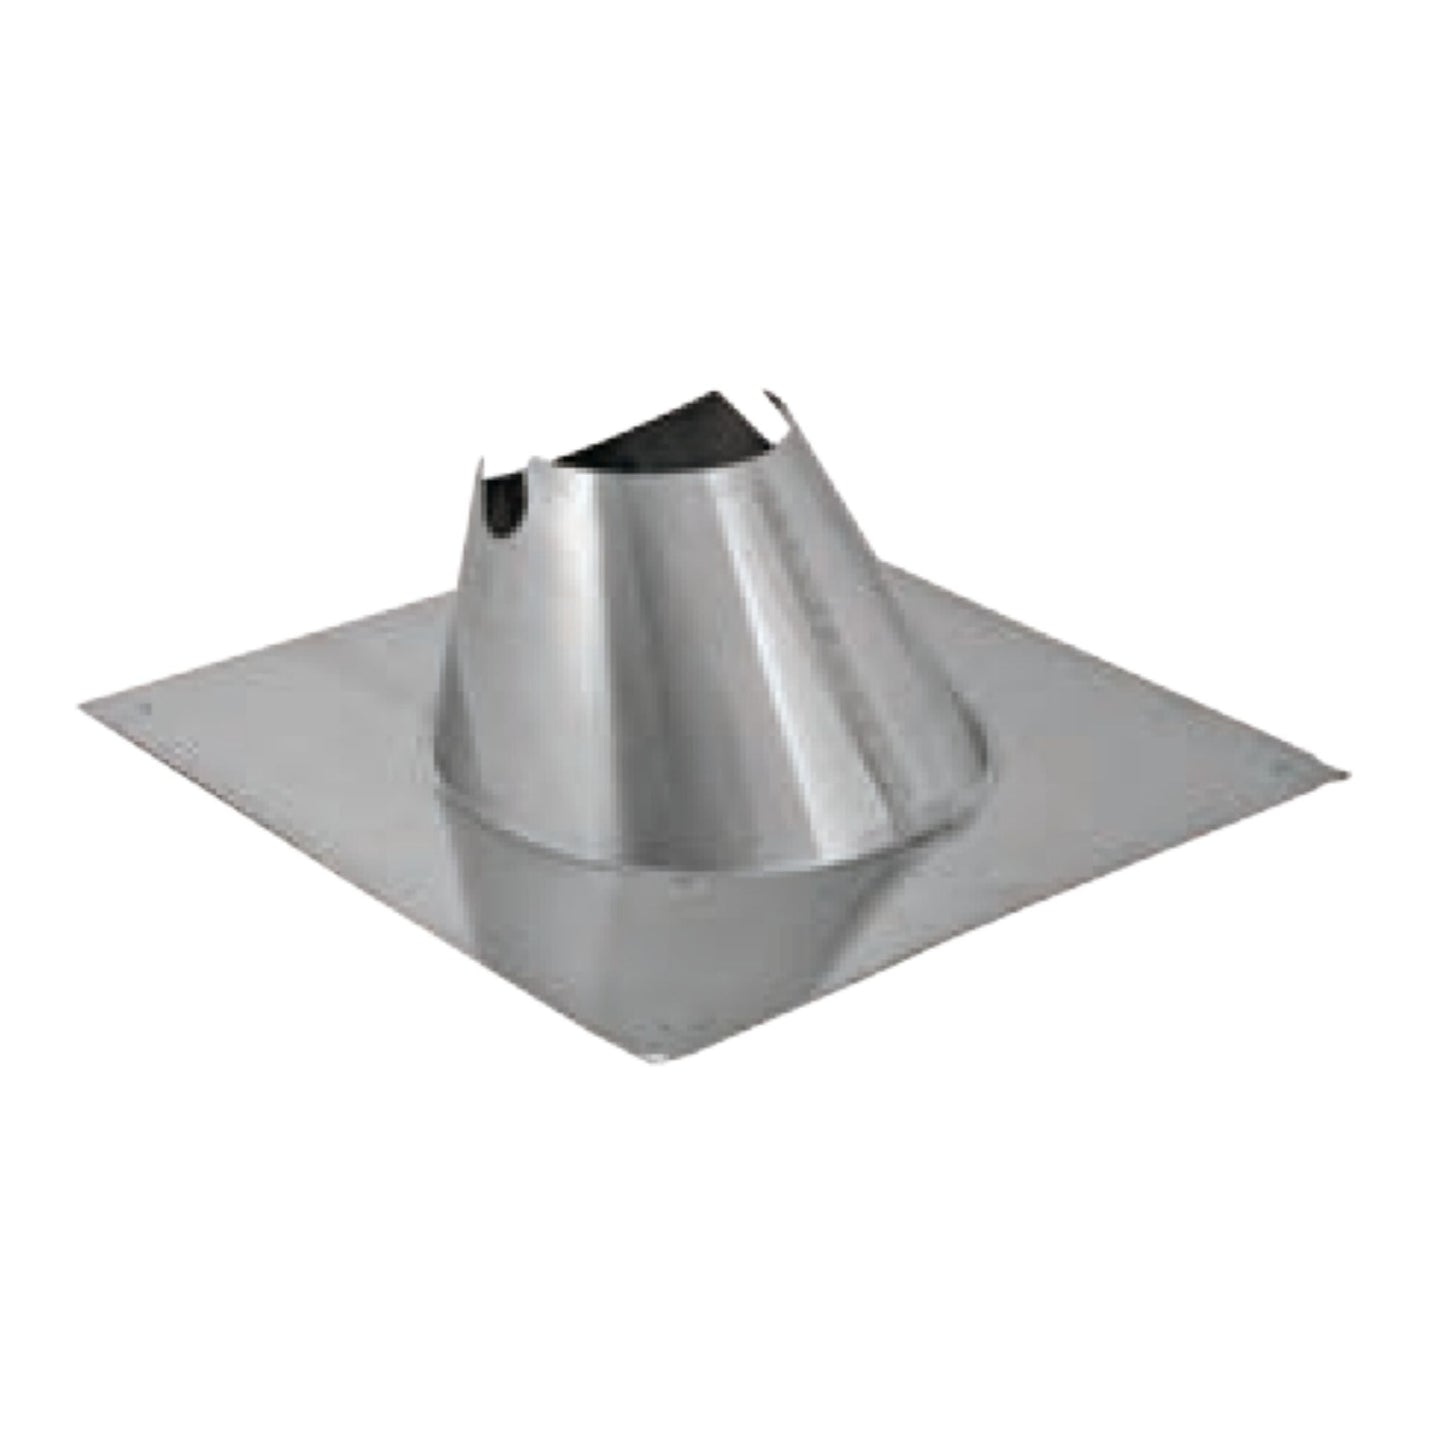 DuraVent FasNSeal 4" 29-4C Stainless Steel Variable Pitch Roof Flashing